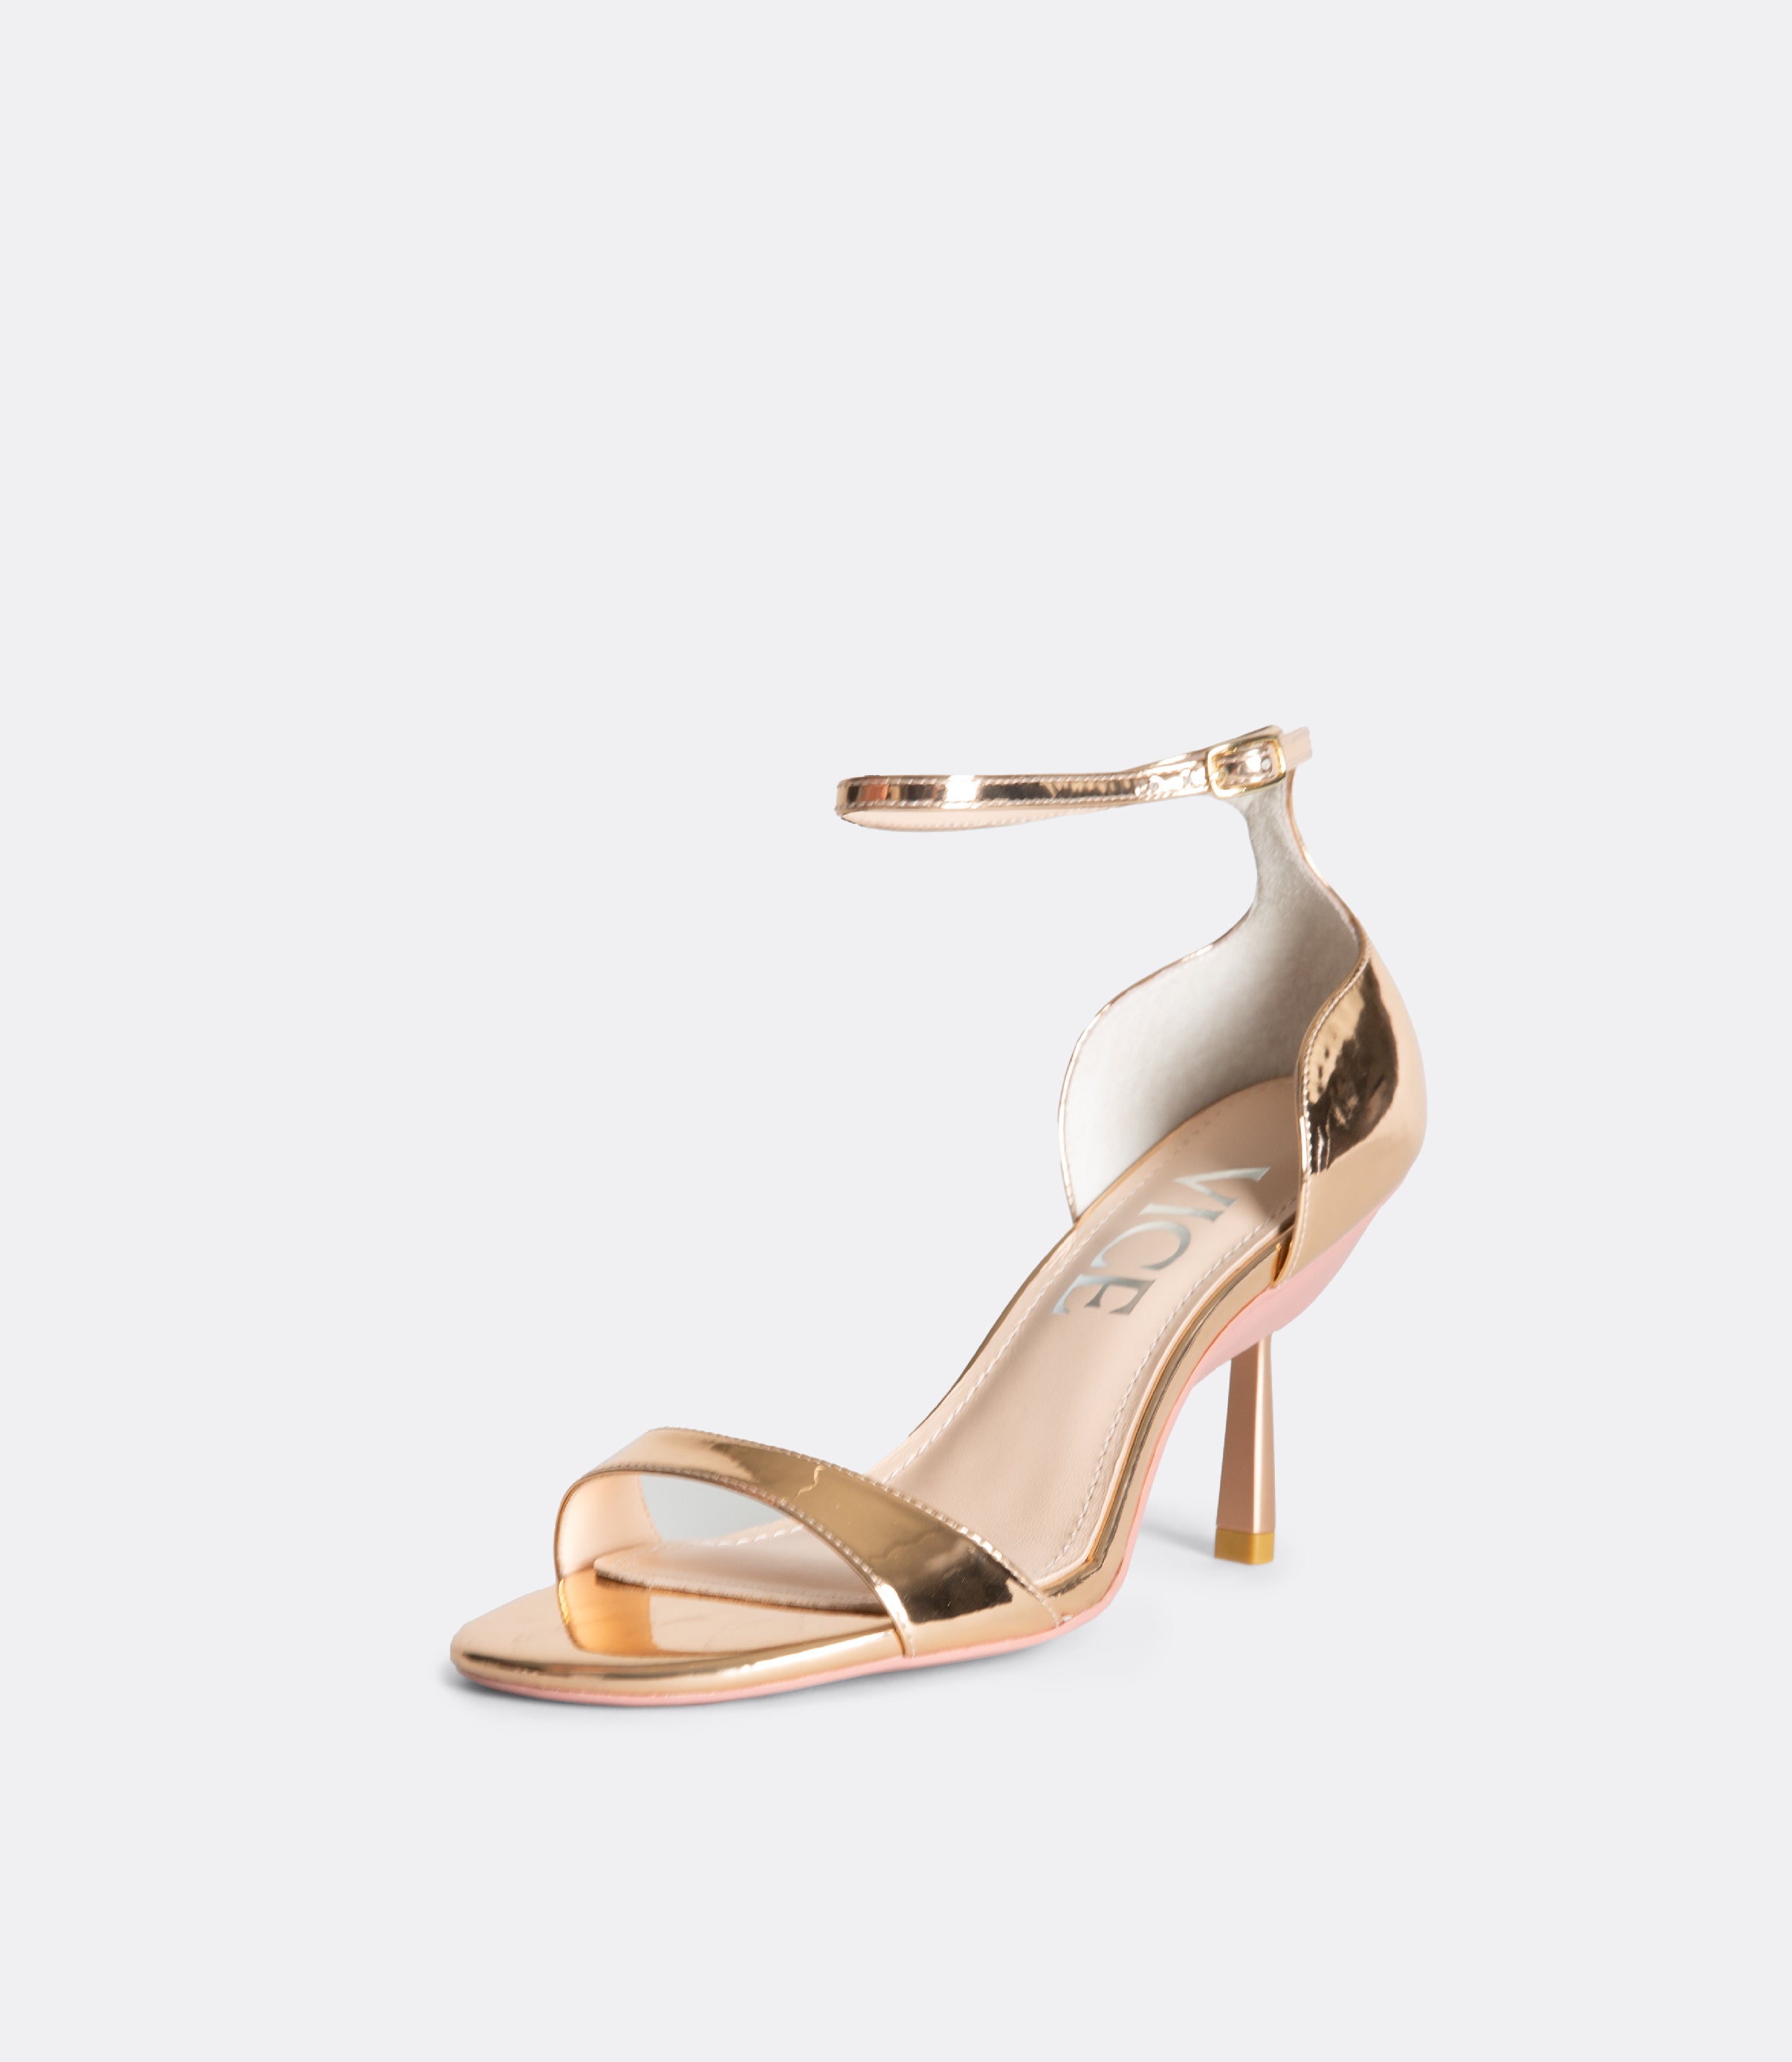 Front view of the rose gold editor sandal.